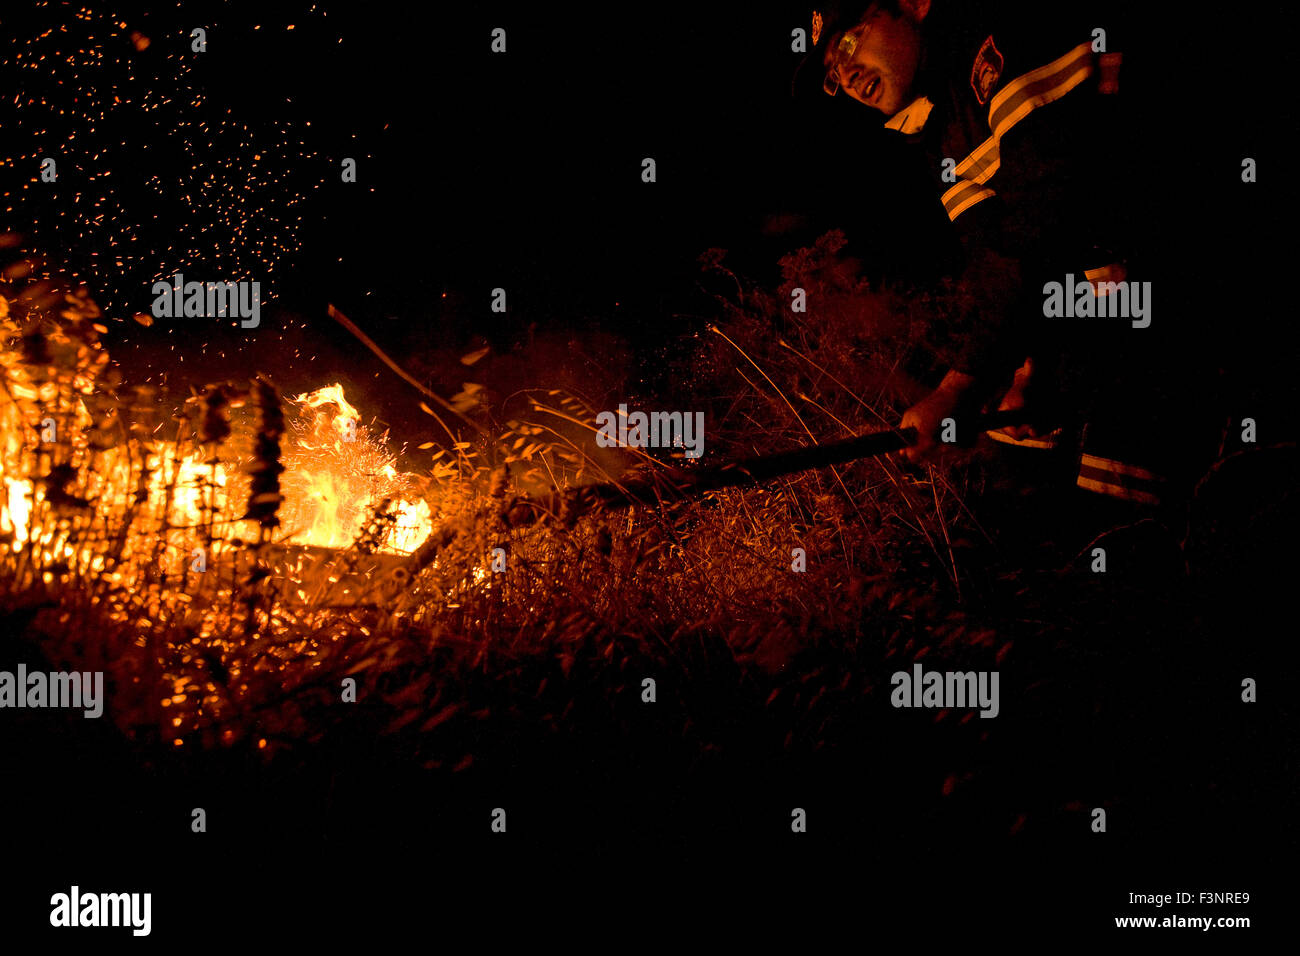 One fireman that arrived on Vorvonas at night, tries to fight fire using a spade causing fire sparks to fly in the air. Stock Photo